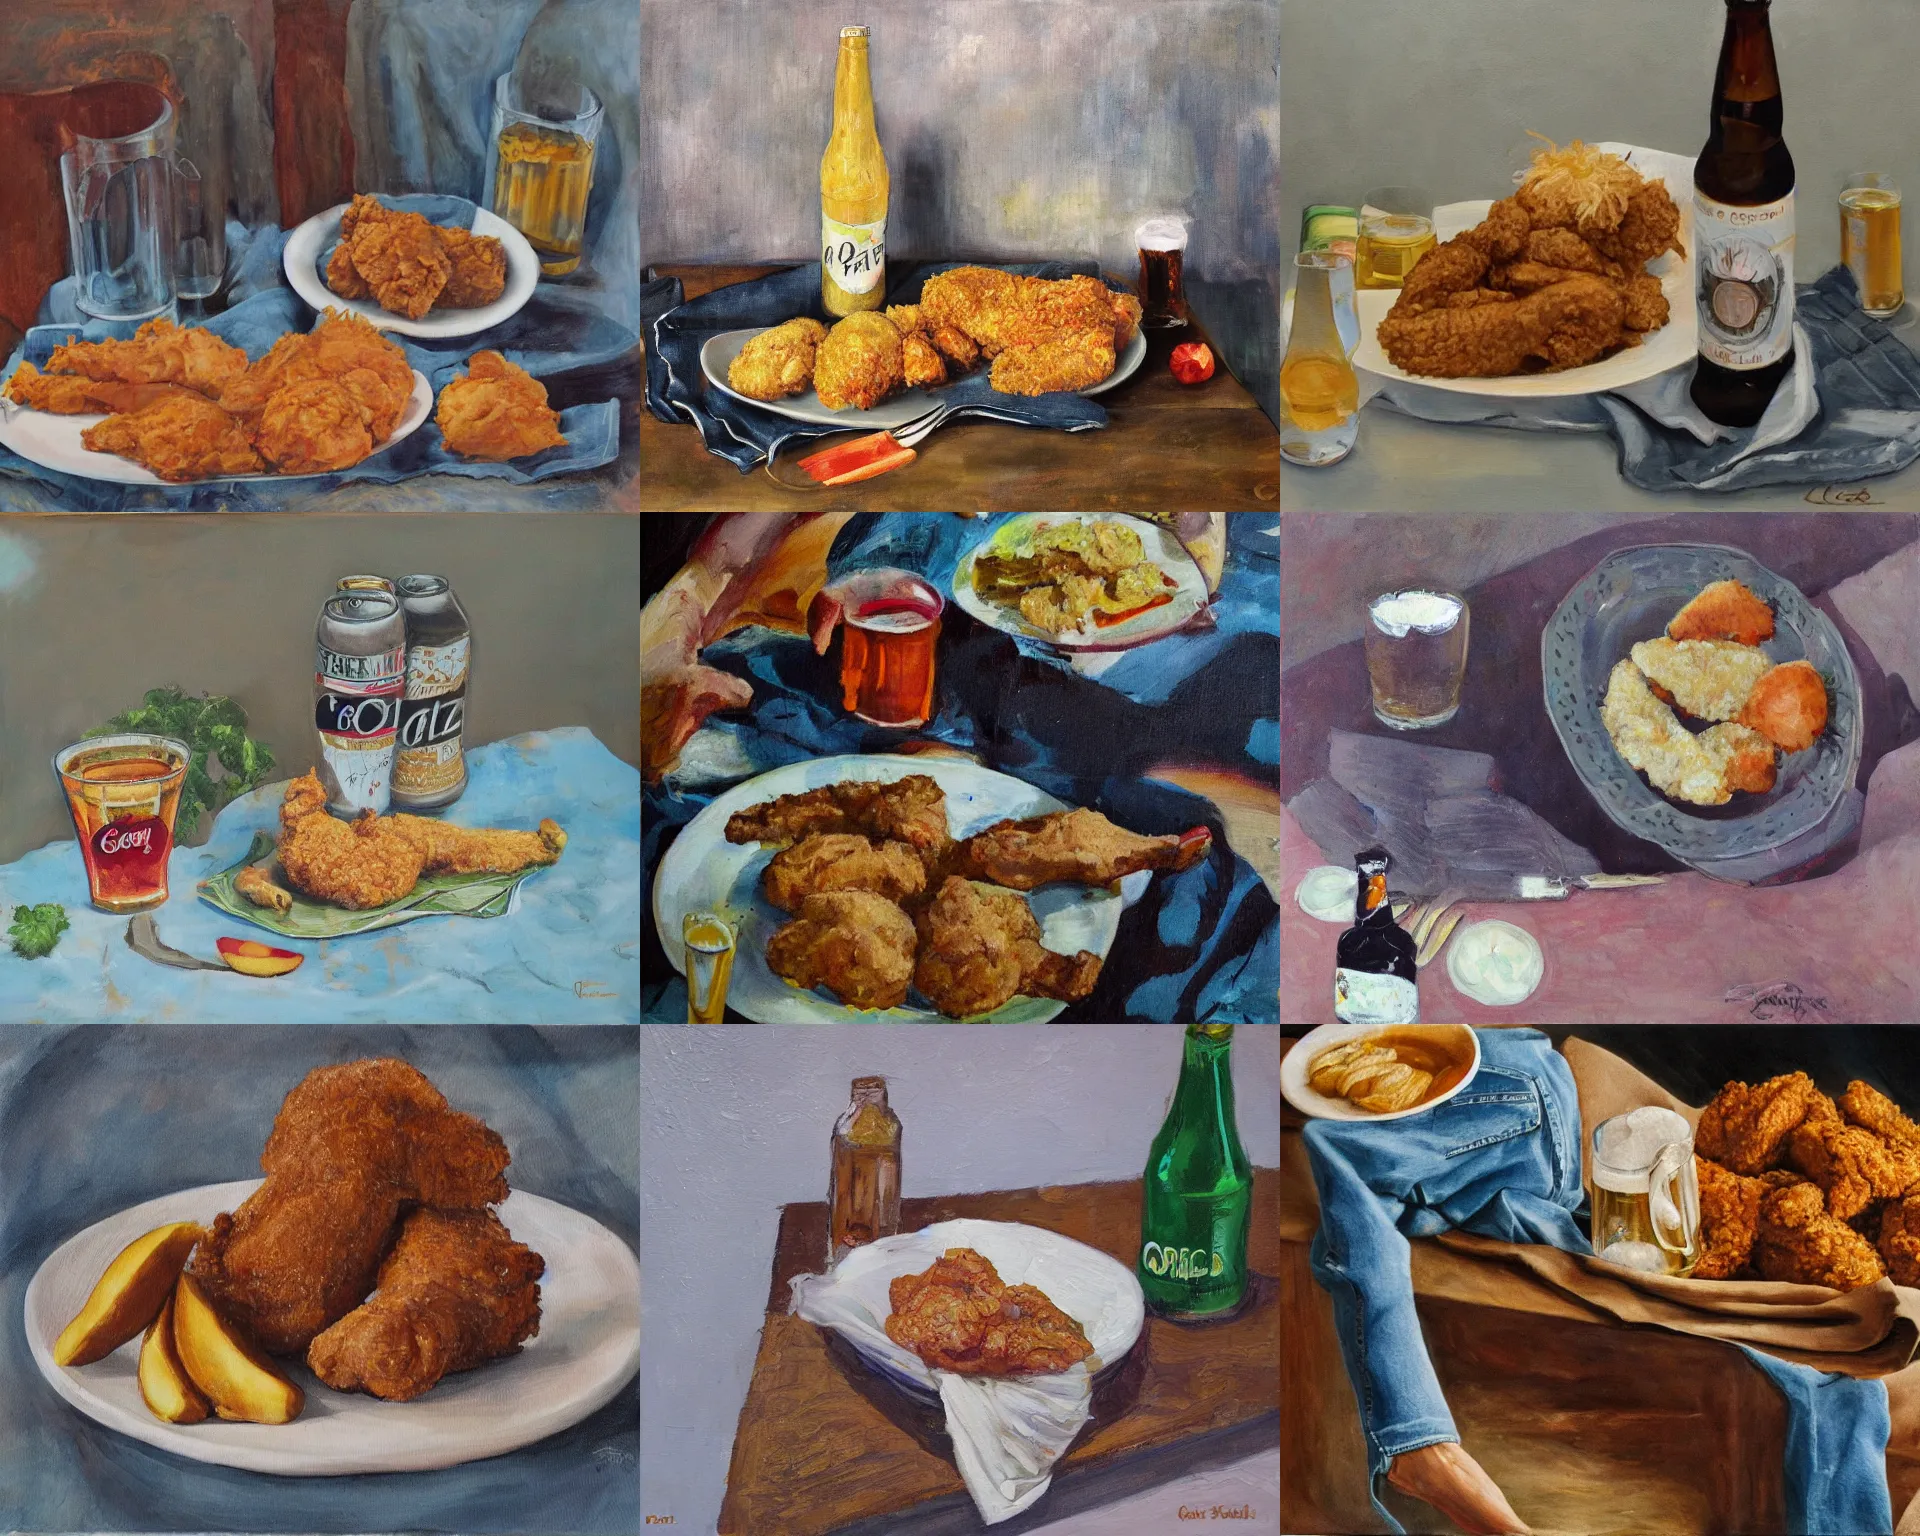 Prompt: fried chicken, cold beer, pair of jeans, georgia pine and peach, oil on canvas